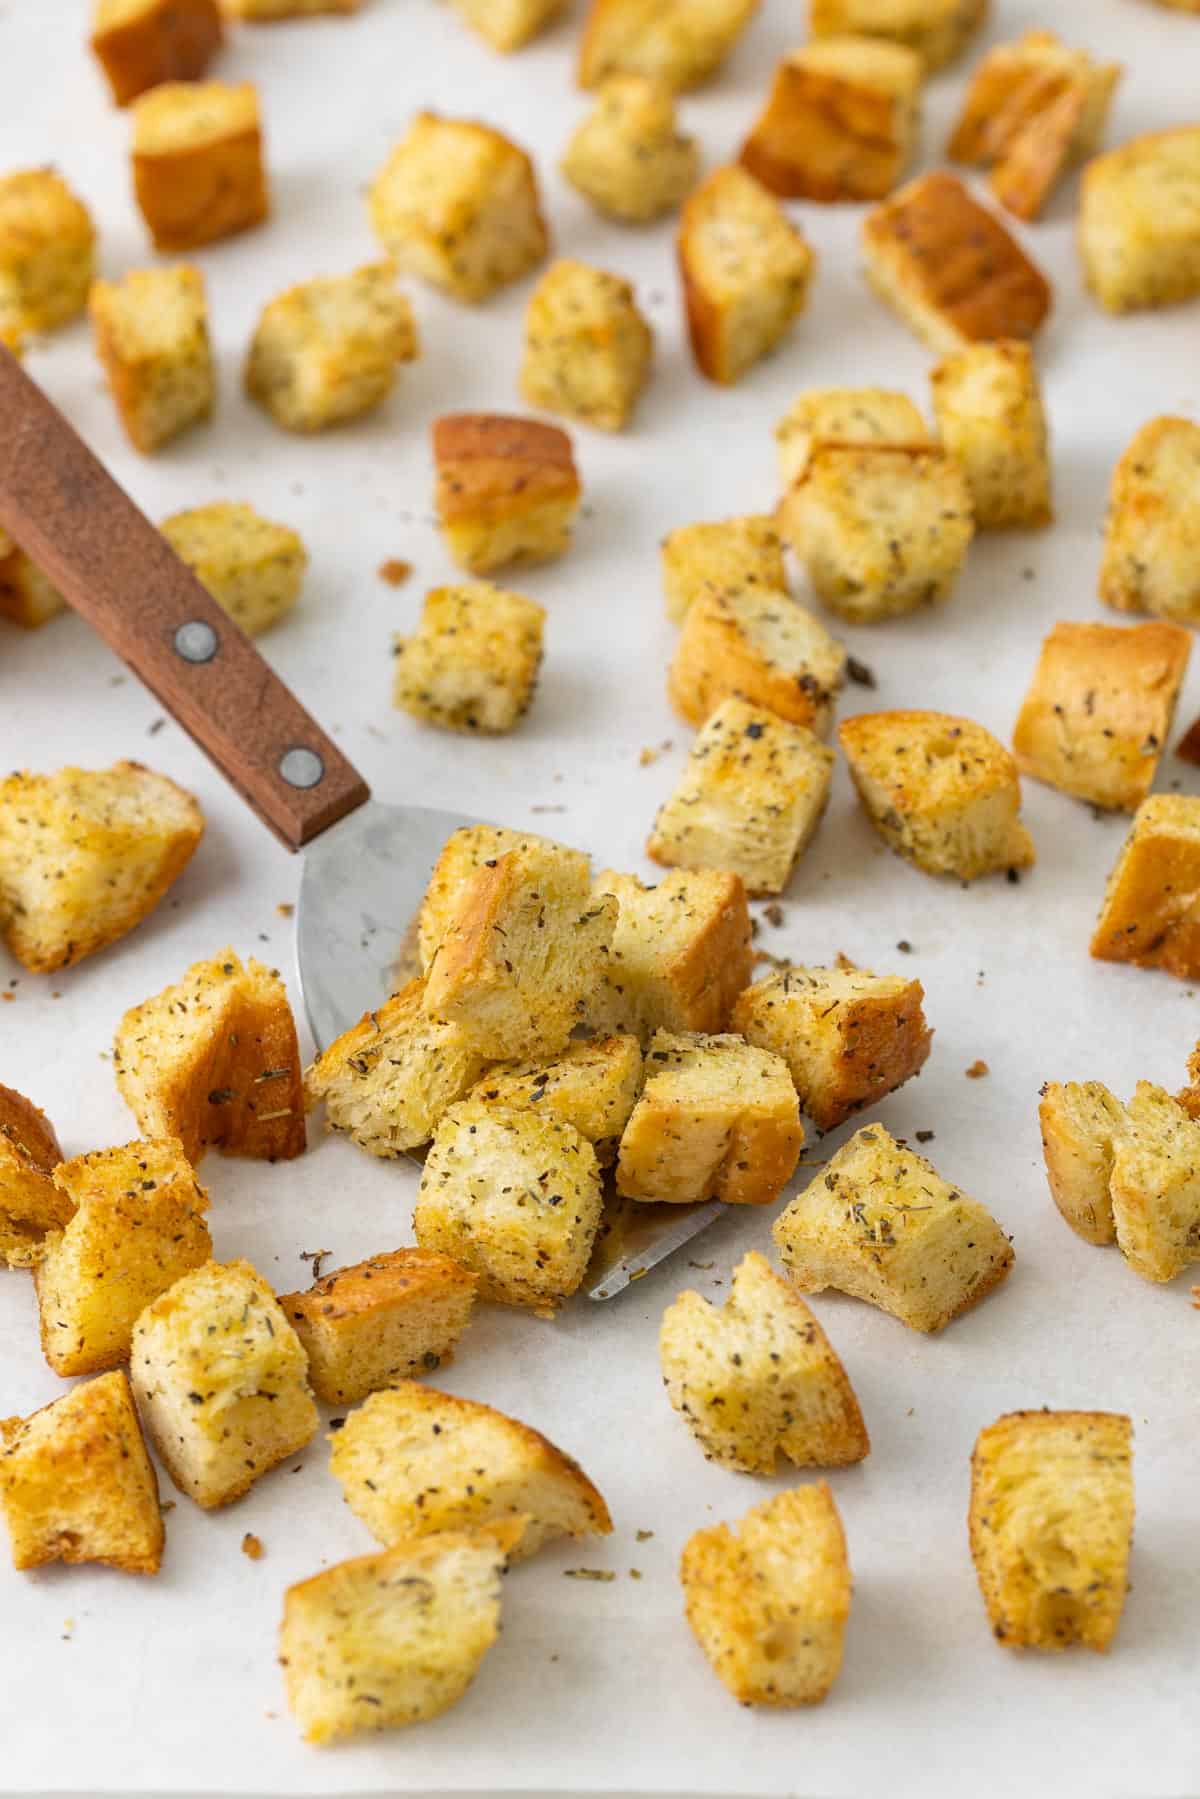 A spatula scoops up croutons on a baking sheet lined with parchment paper.